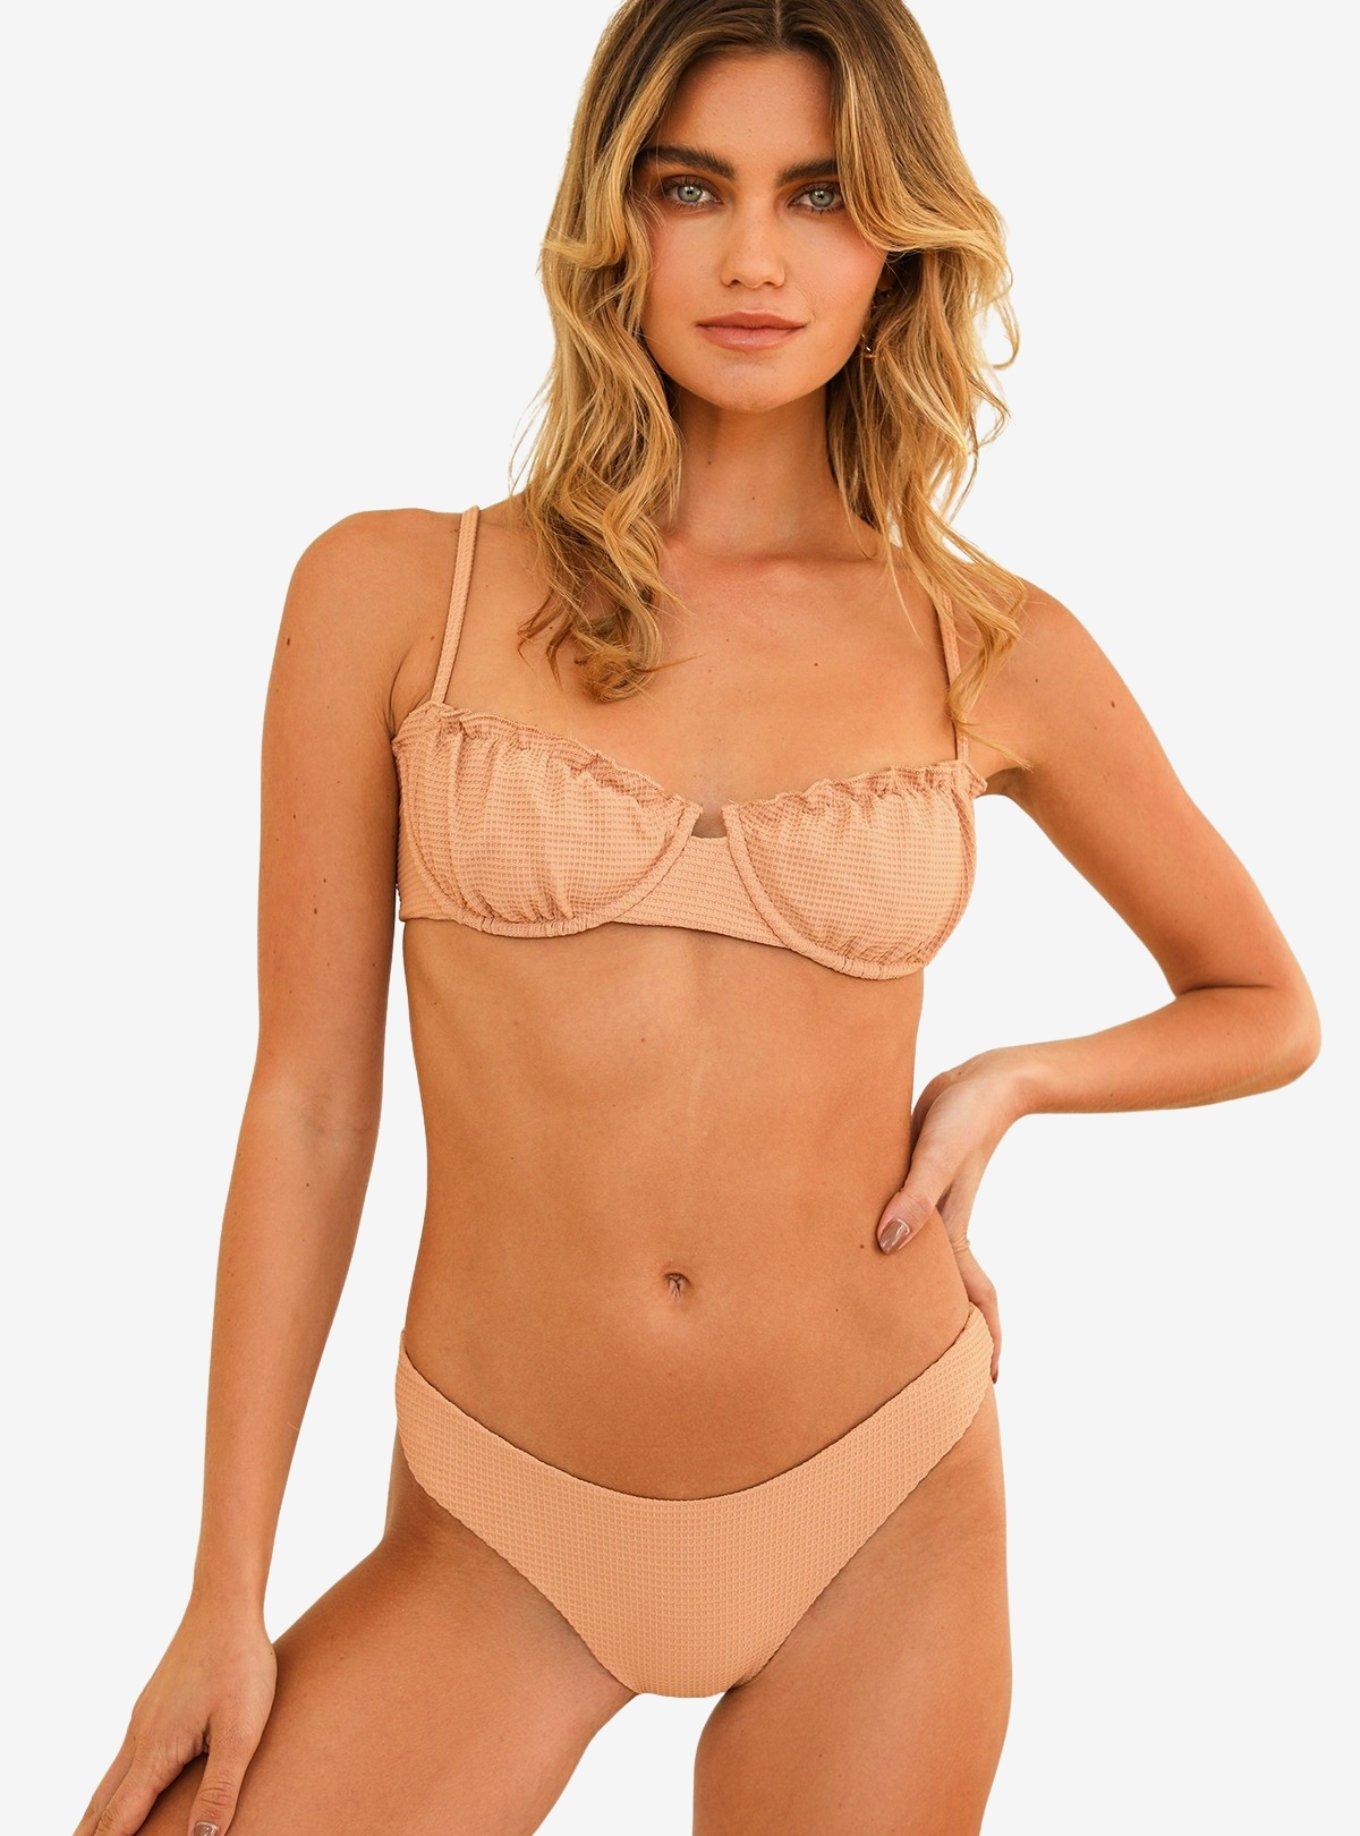 Dippin' Daisy's Primrose Underwire Swim Top Canyons, BEIGE, hi-res